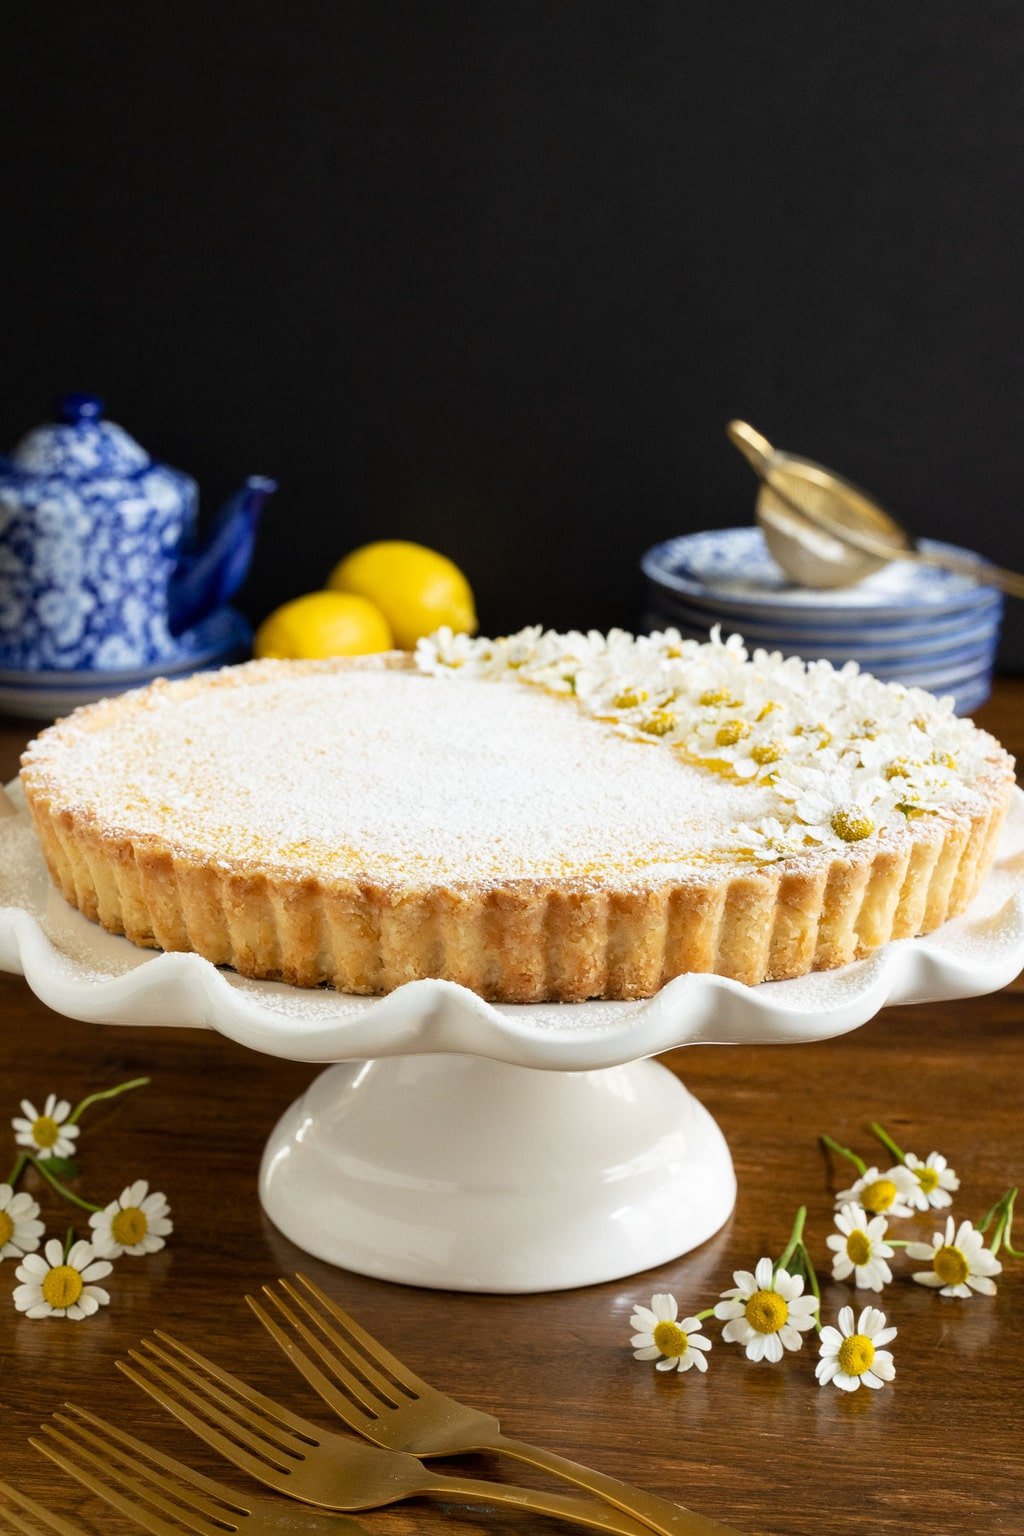 Vertical photo of a French Lemon Tart sprinkled with powdered sugar and decorated with edible camomile flowers.